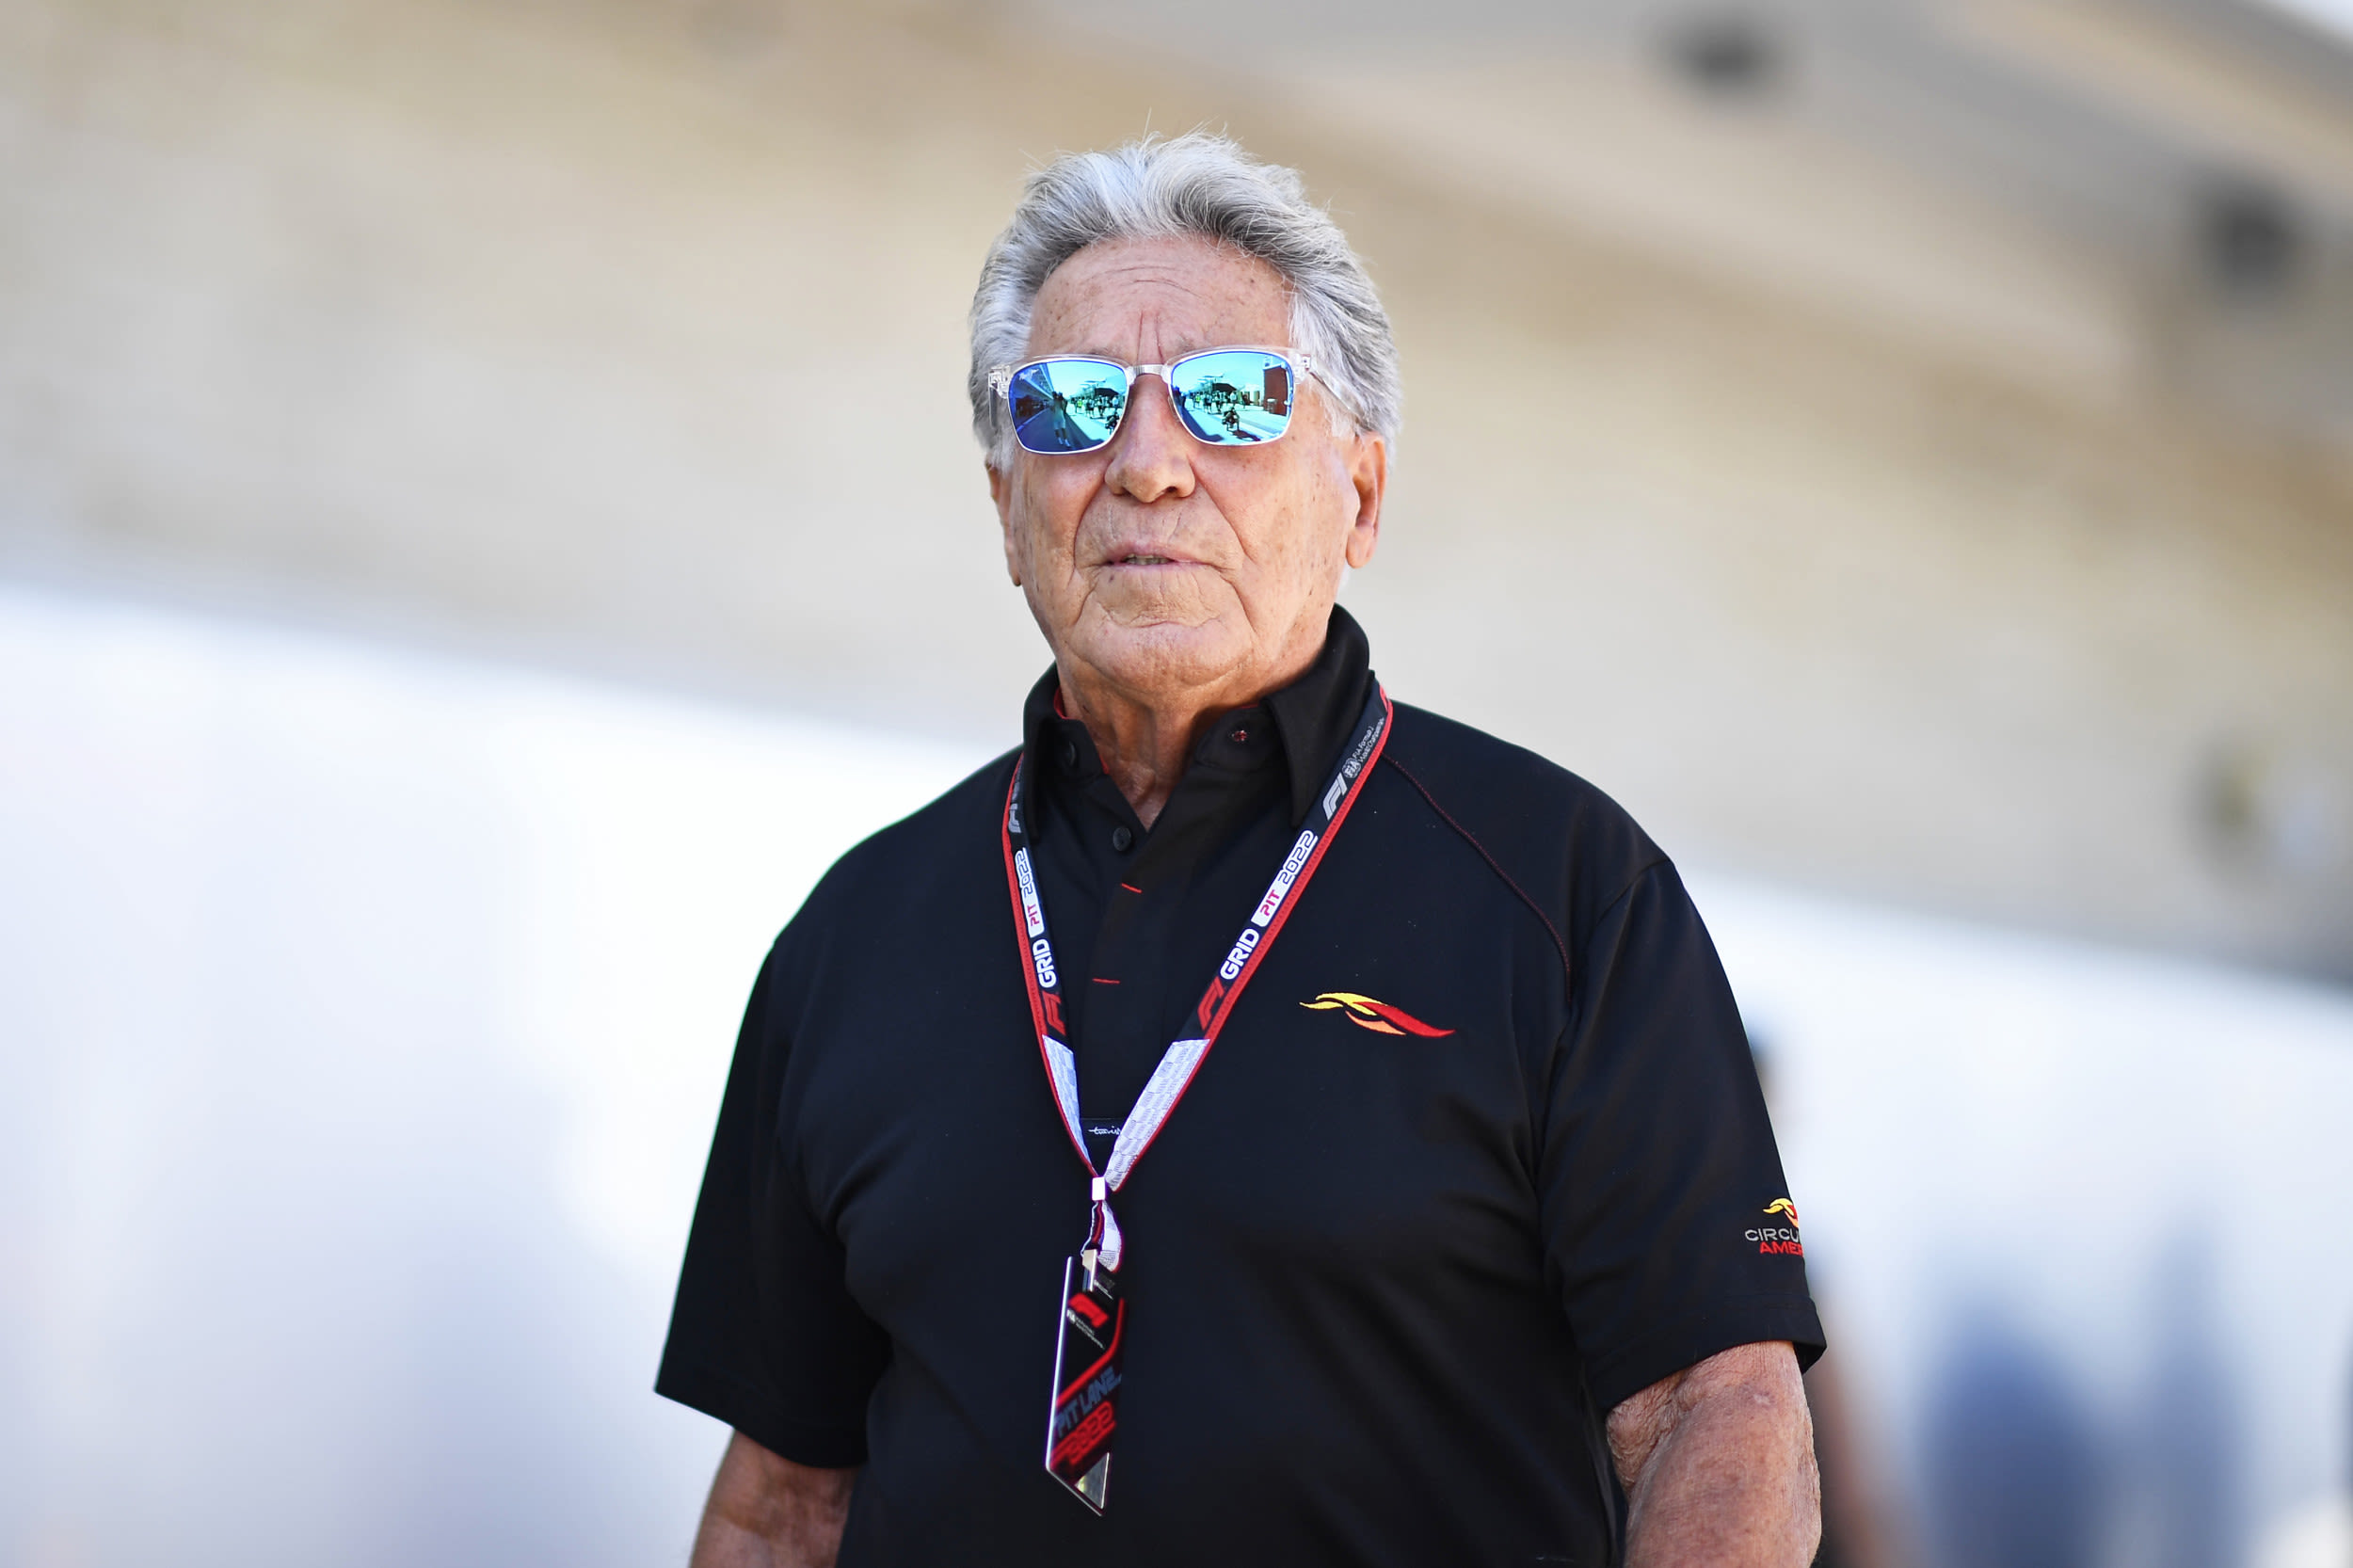 Fan misses out on once-in-a-lifetime Mario Andretti moment